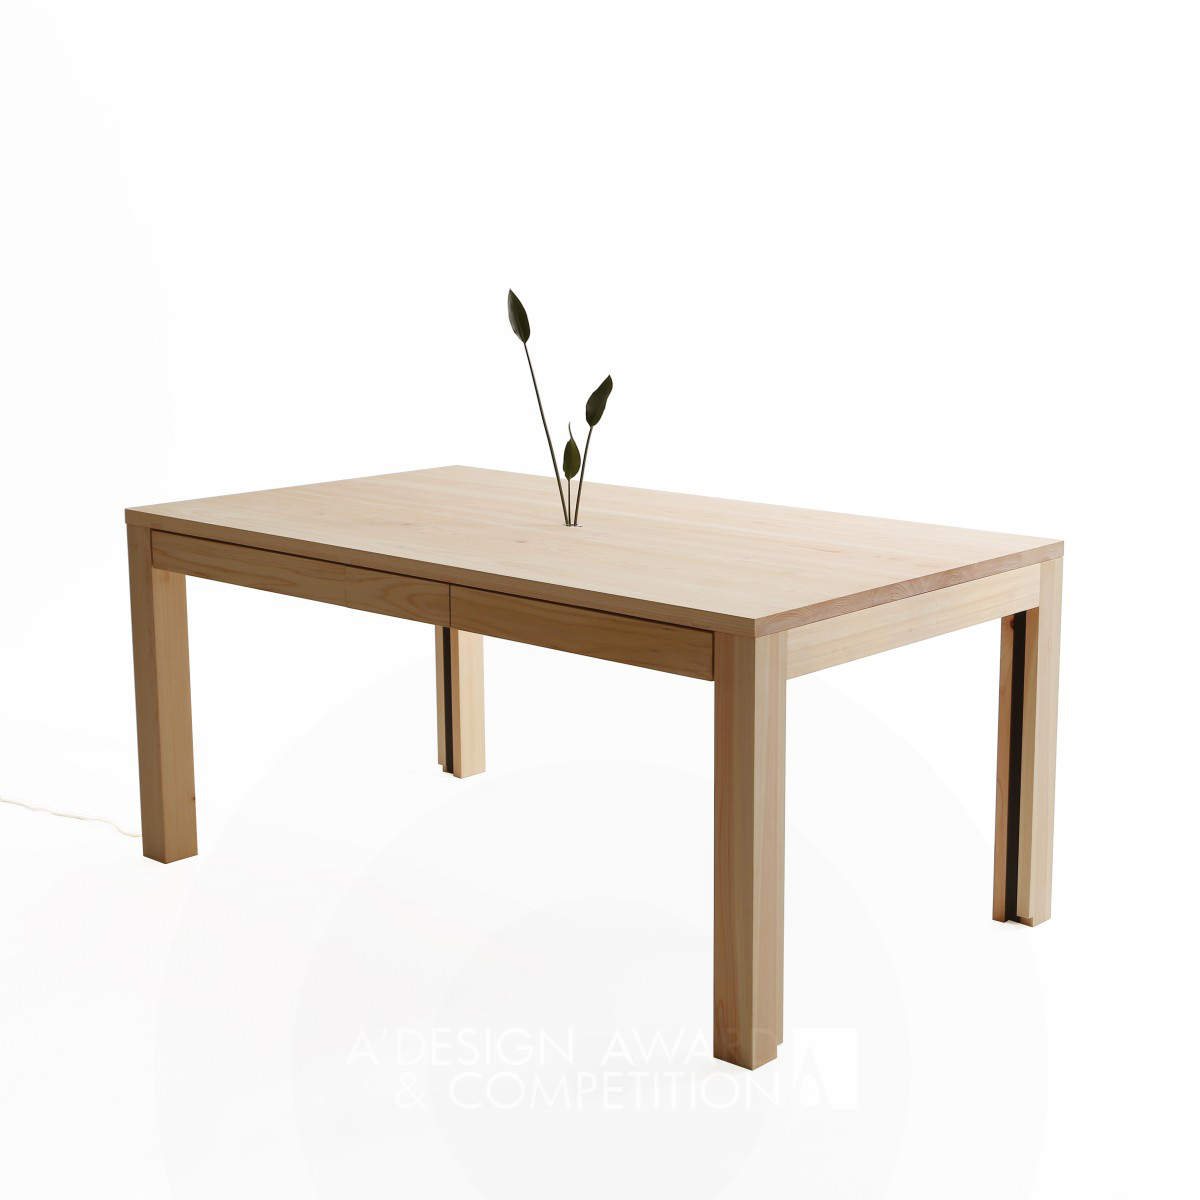 Consentable MT: A Multi-Purpose Dining Table for Modern Living